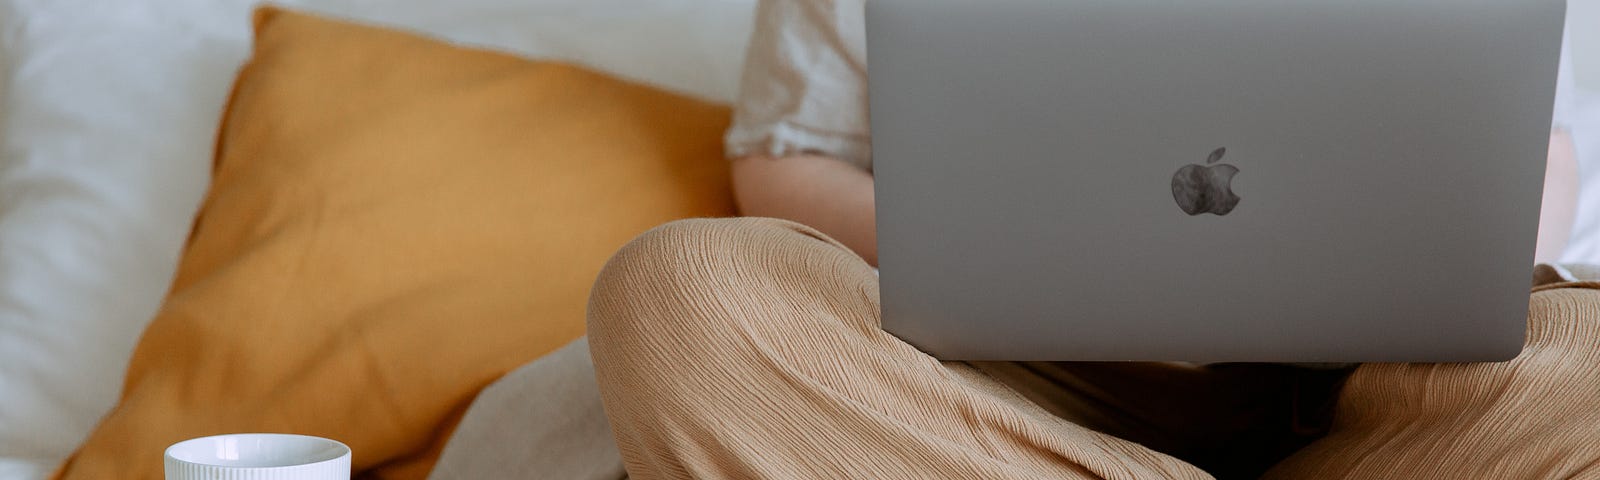 woman working on a laptop on her bed